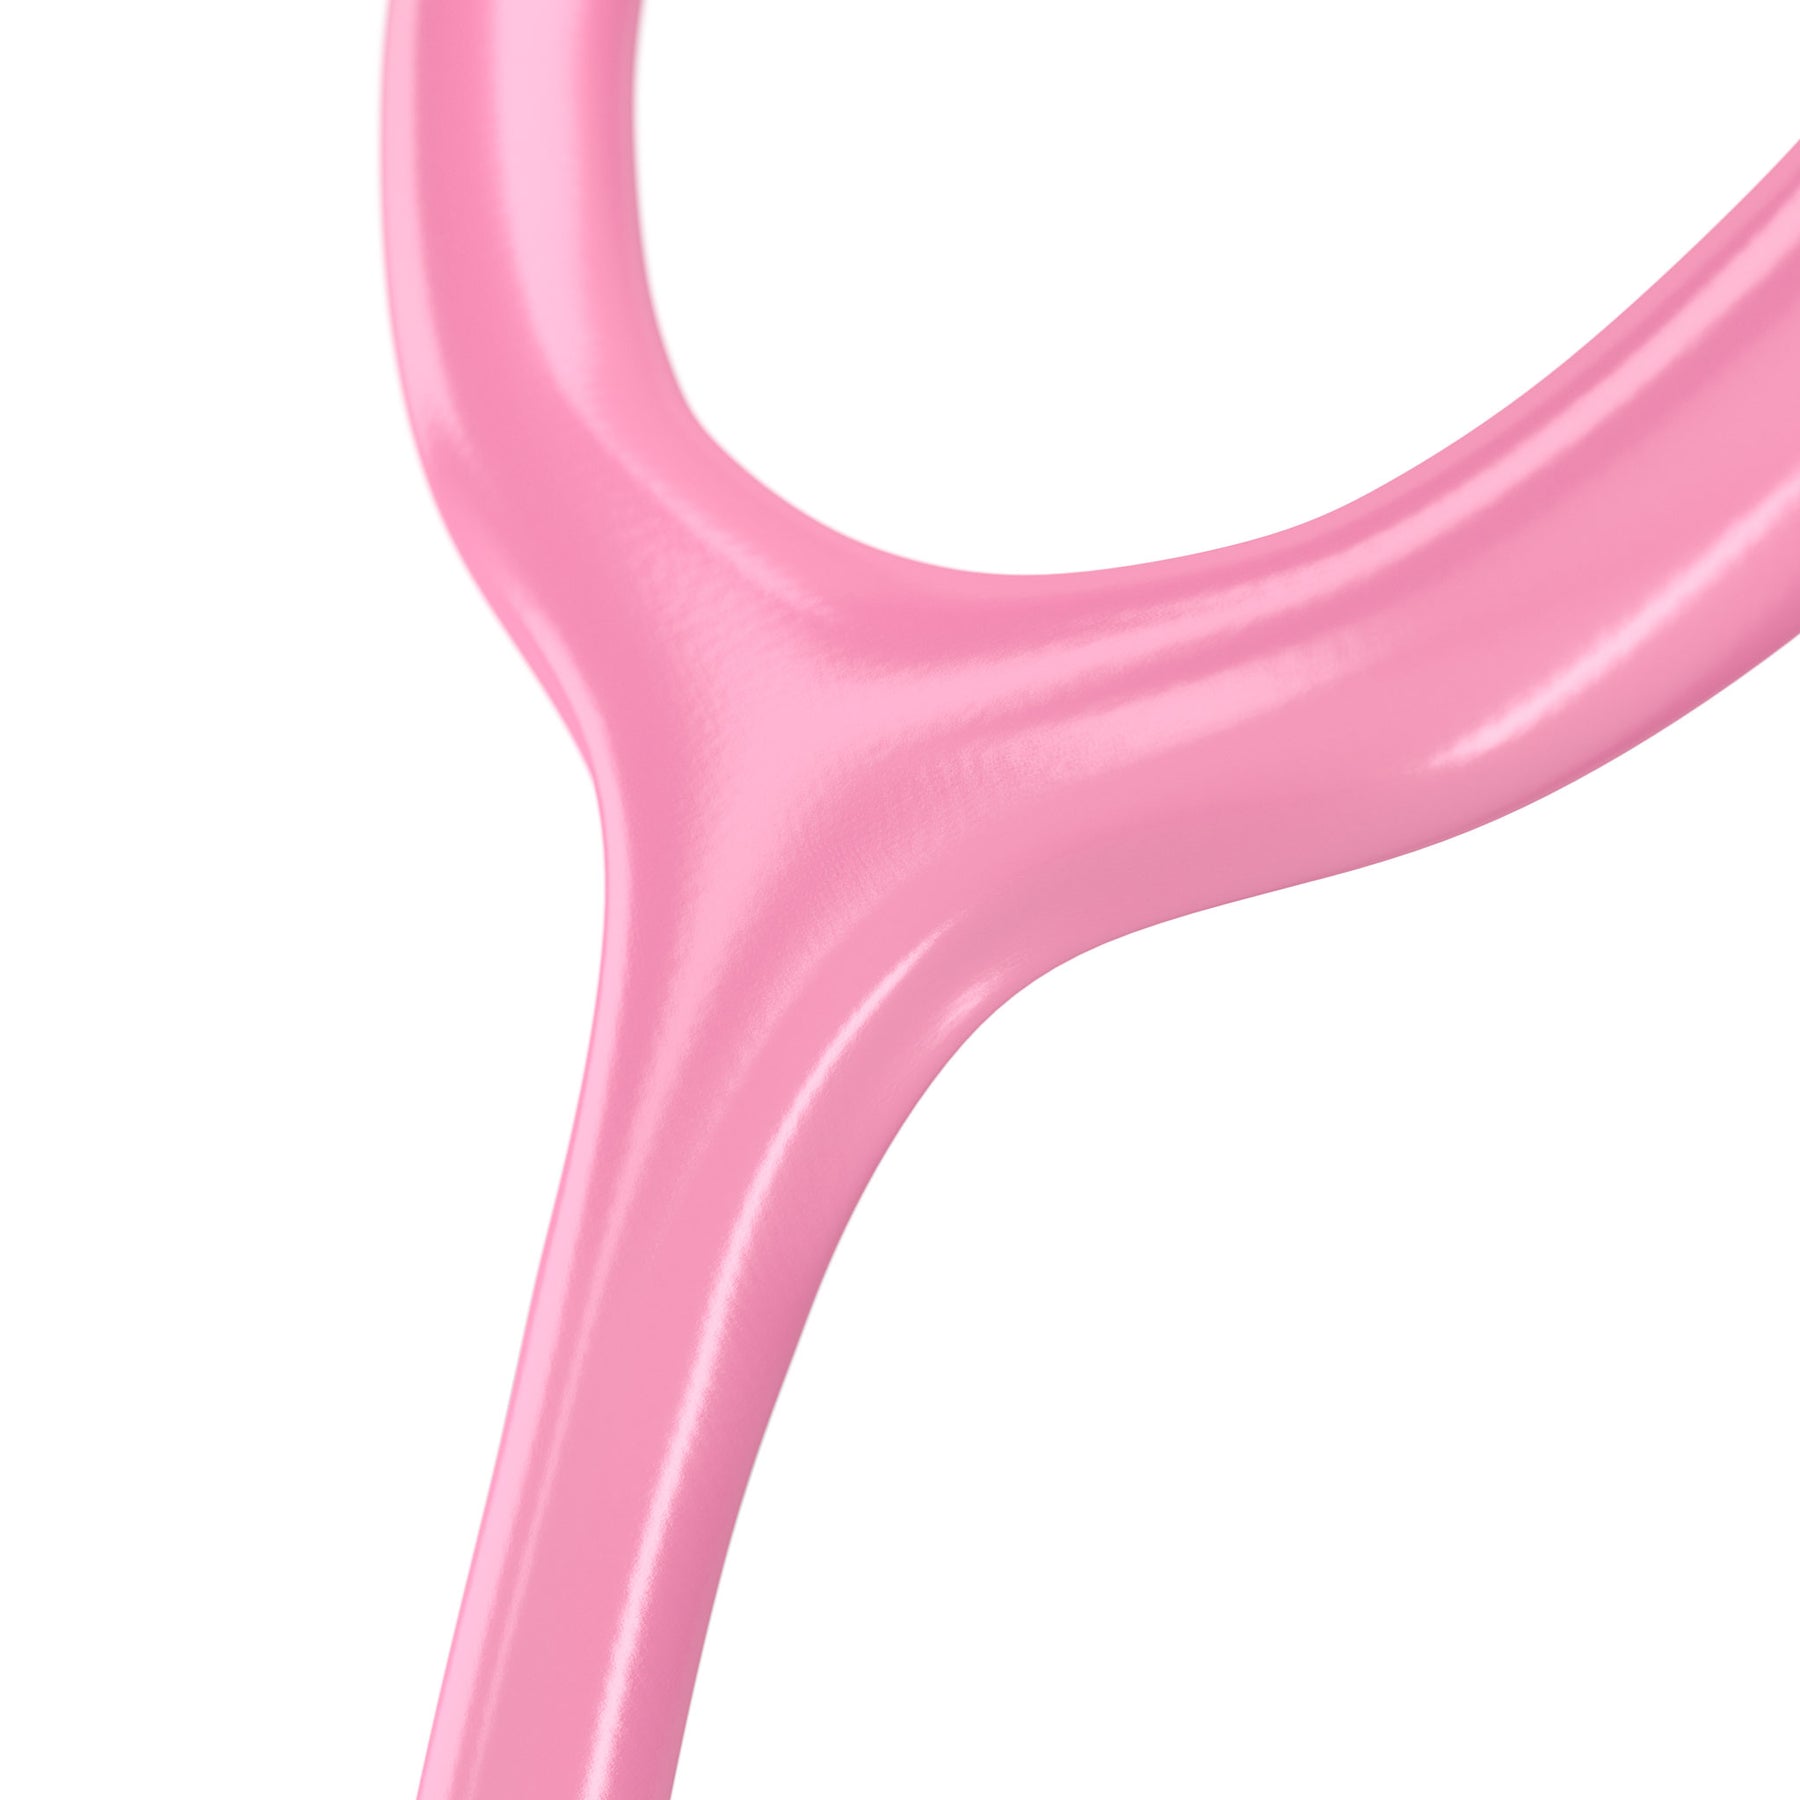 ACOUSTICA® PINK STETHOSCOPE PINKORE AND COSMO